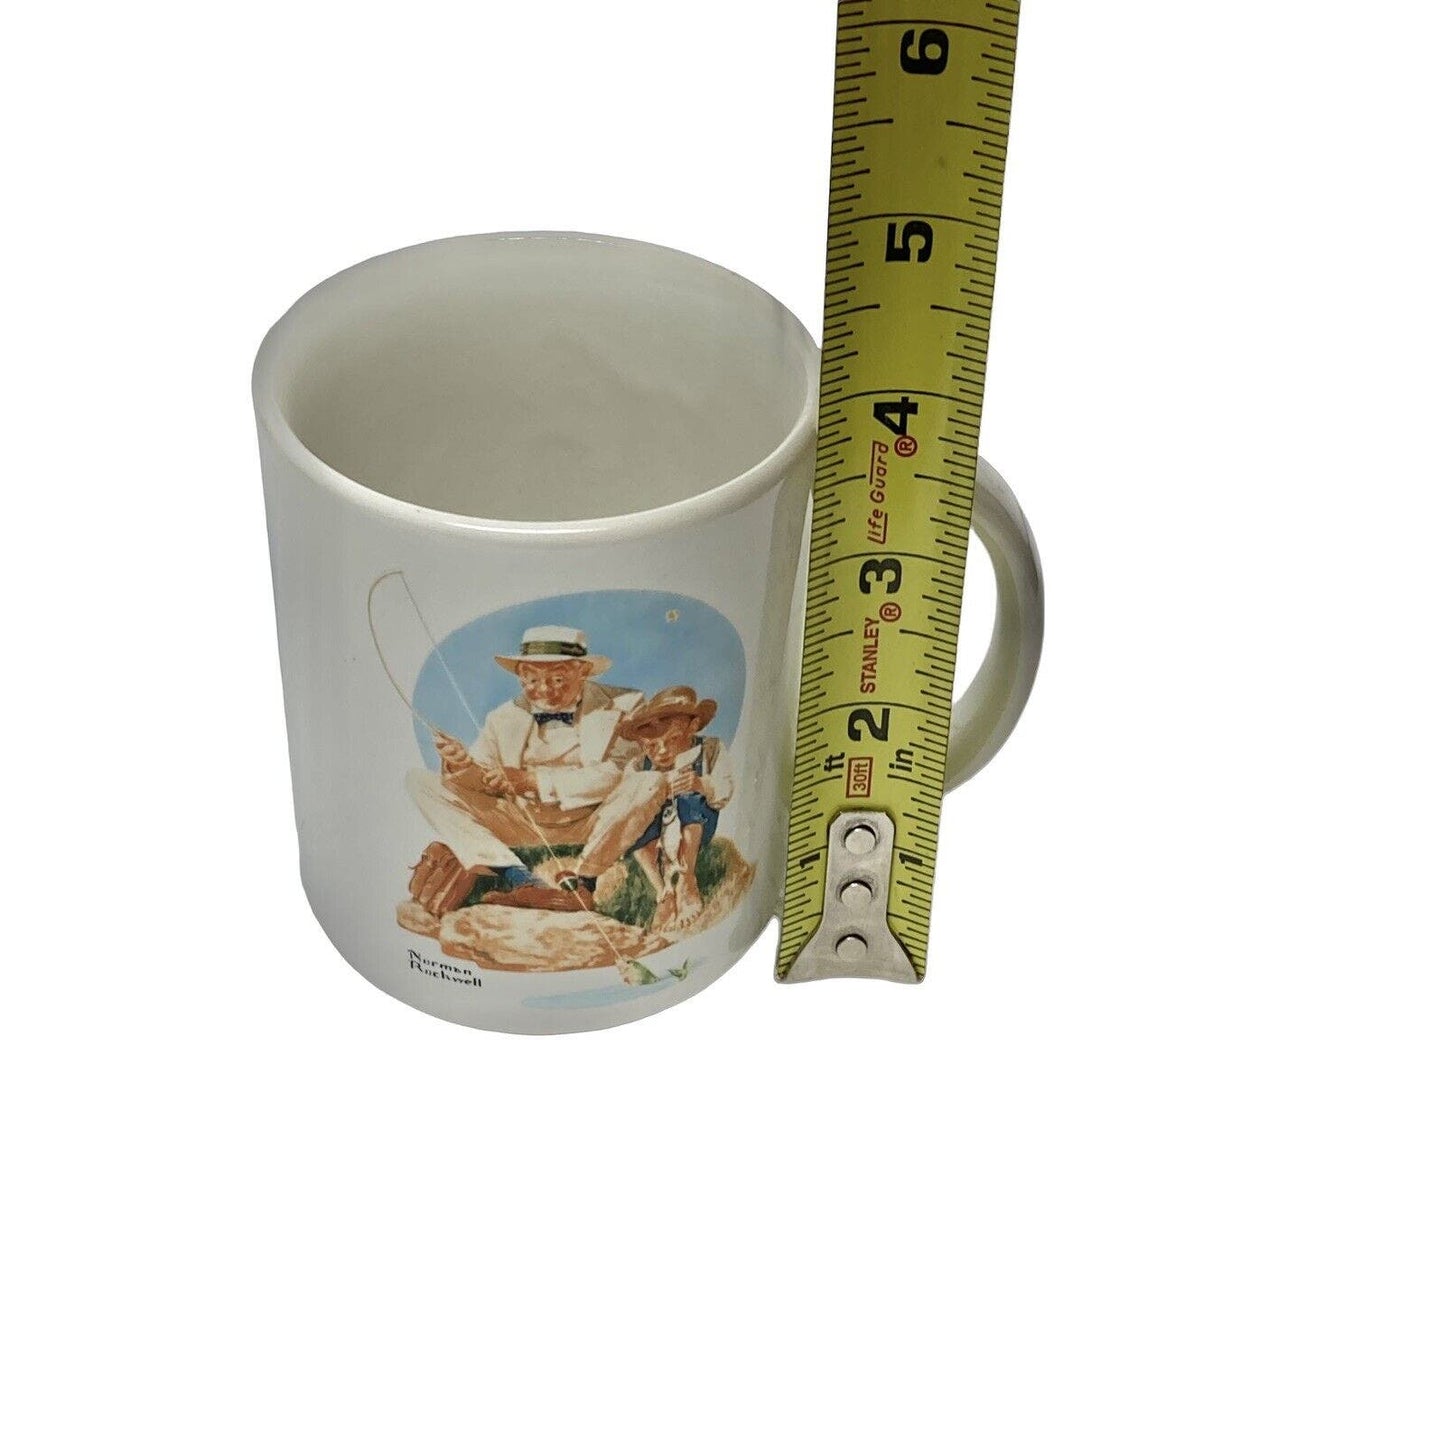 Norman Rockwell "Catching the Big One" Museum Collections Ceramic Coffee Mug Cup